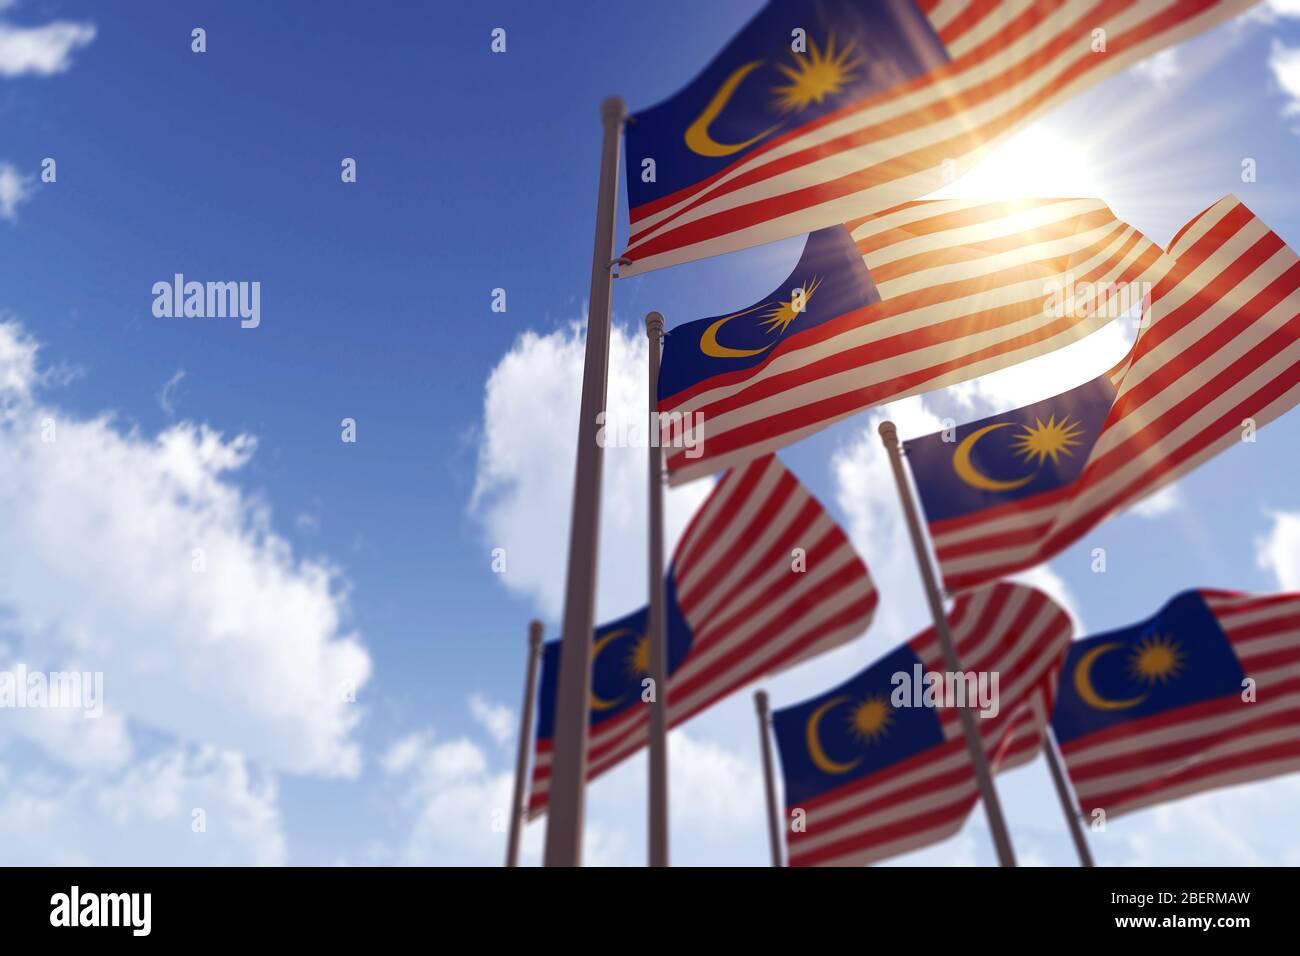 Malaysia flags waving in the wind against a blue sky. 3D Rendering Stock Photo